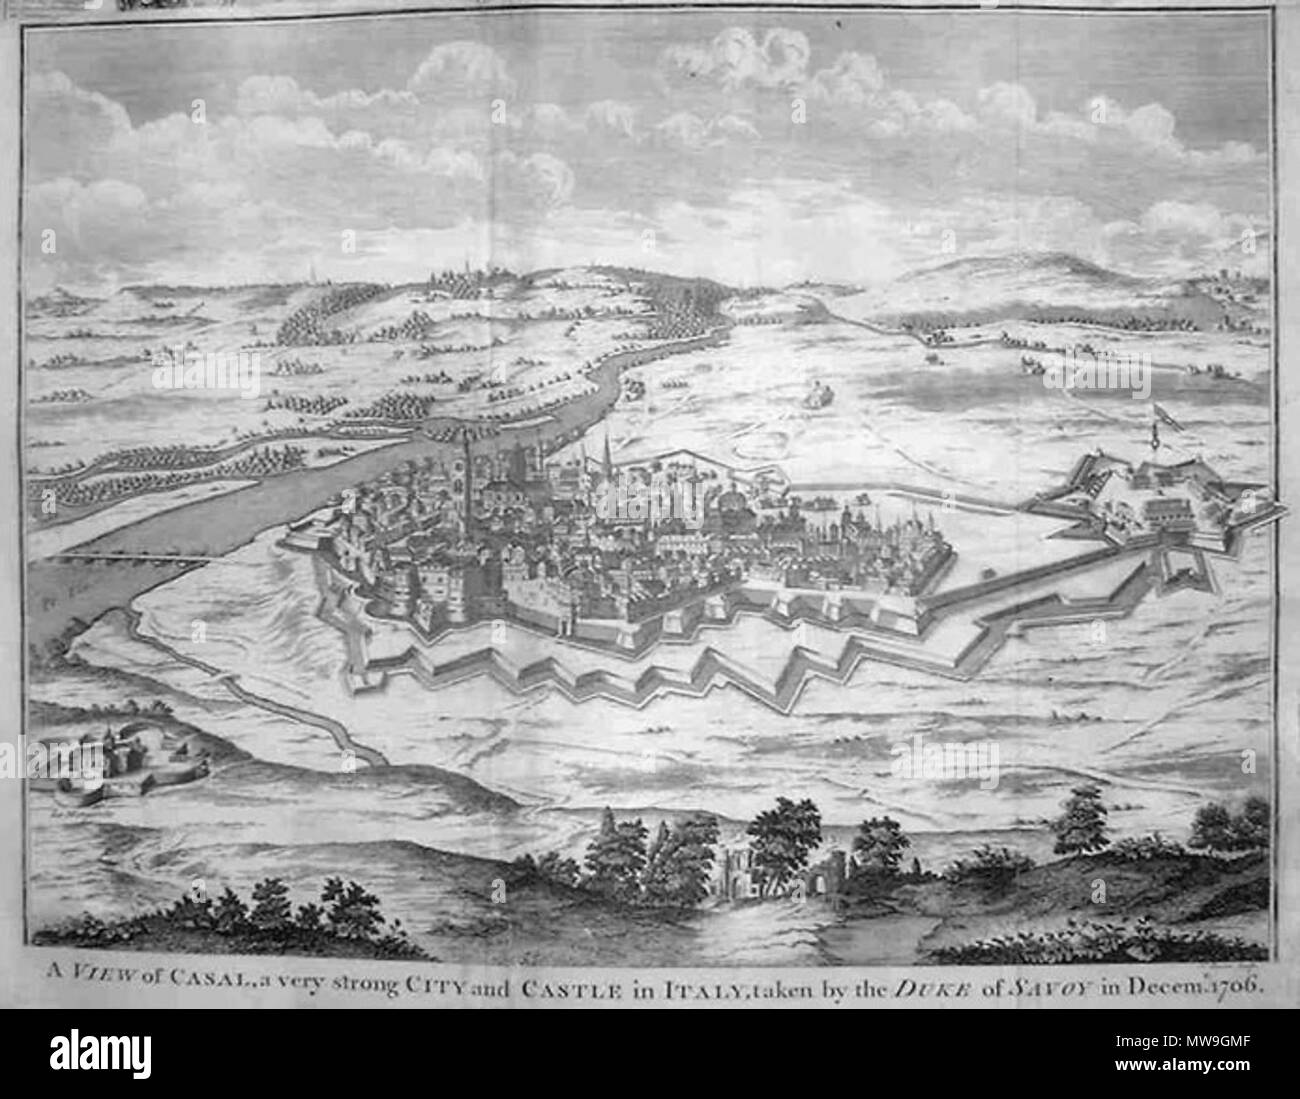 . A View of Casal (today Casale Monferrato) ‘a very strong city & castle in Italy taken by the Duke of Savoy in Decem. 1706’, copper engraving, 35 x 48cm . 1745, London. Basire-Rapin 116 Casal-1745 Stock Photo